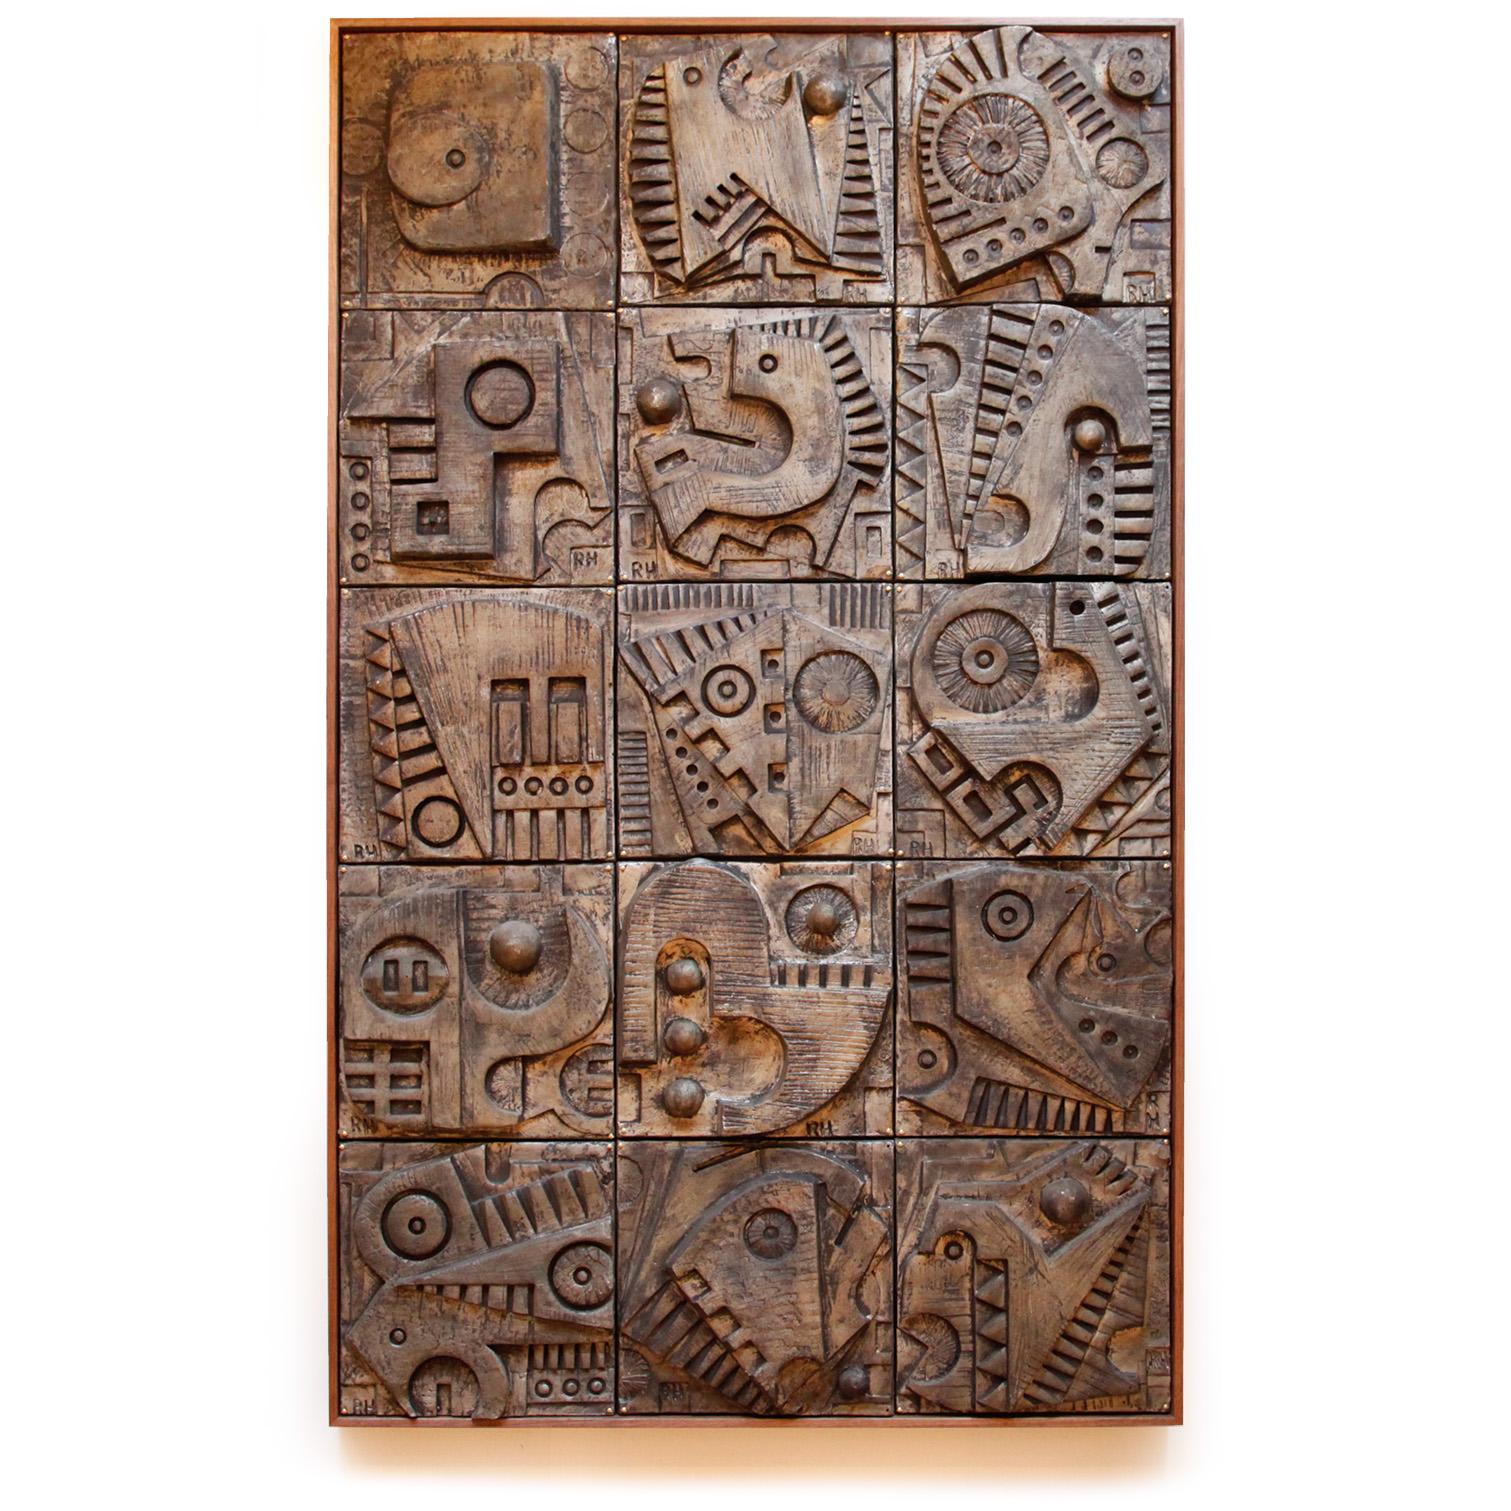 Monumental panel of 15 handmade fibreglass relief sculptures from the artist's own home. Each sculpture is signed and unique, with beautiful tarnished gold tones.

This very large, striking piece has a great Brutalist and Modernist feel. It is